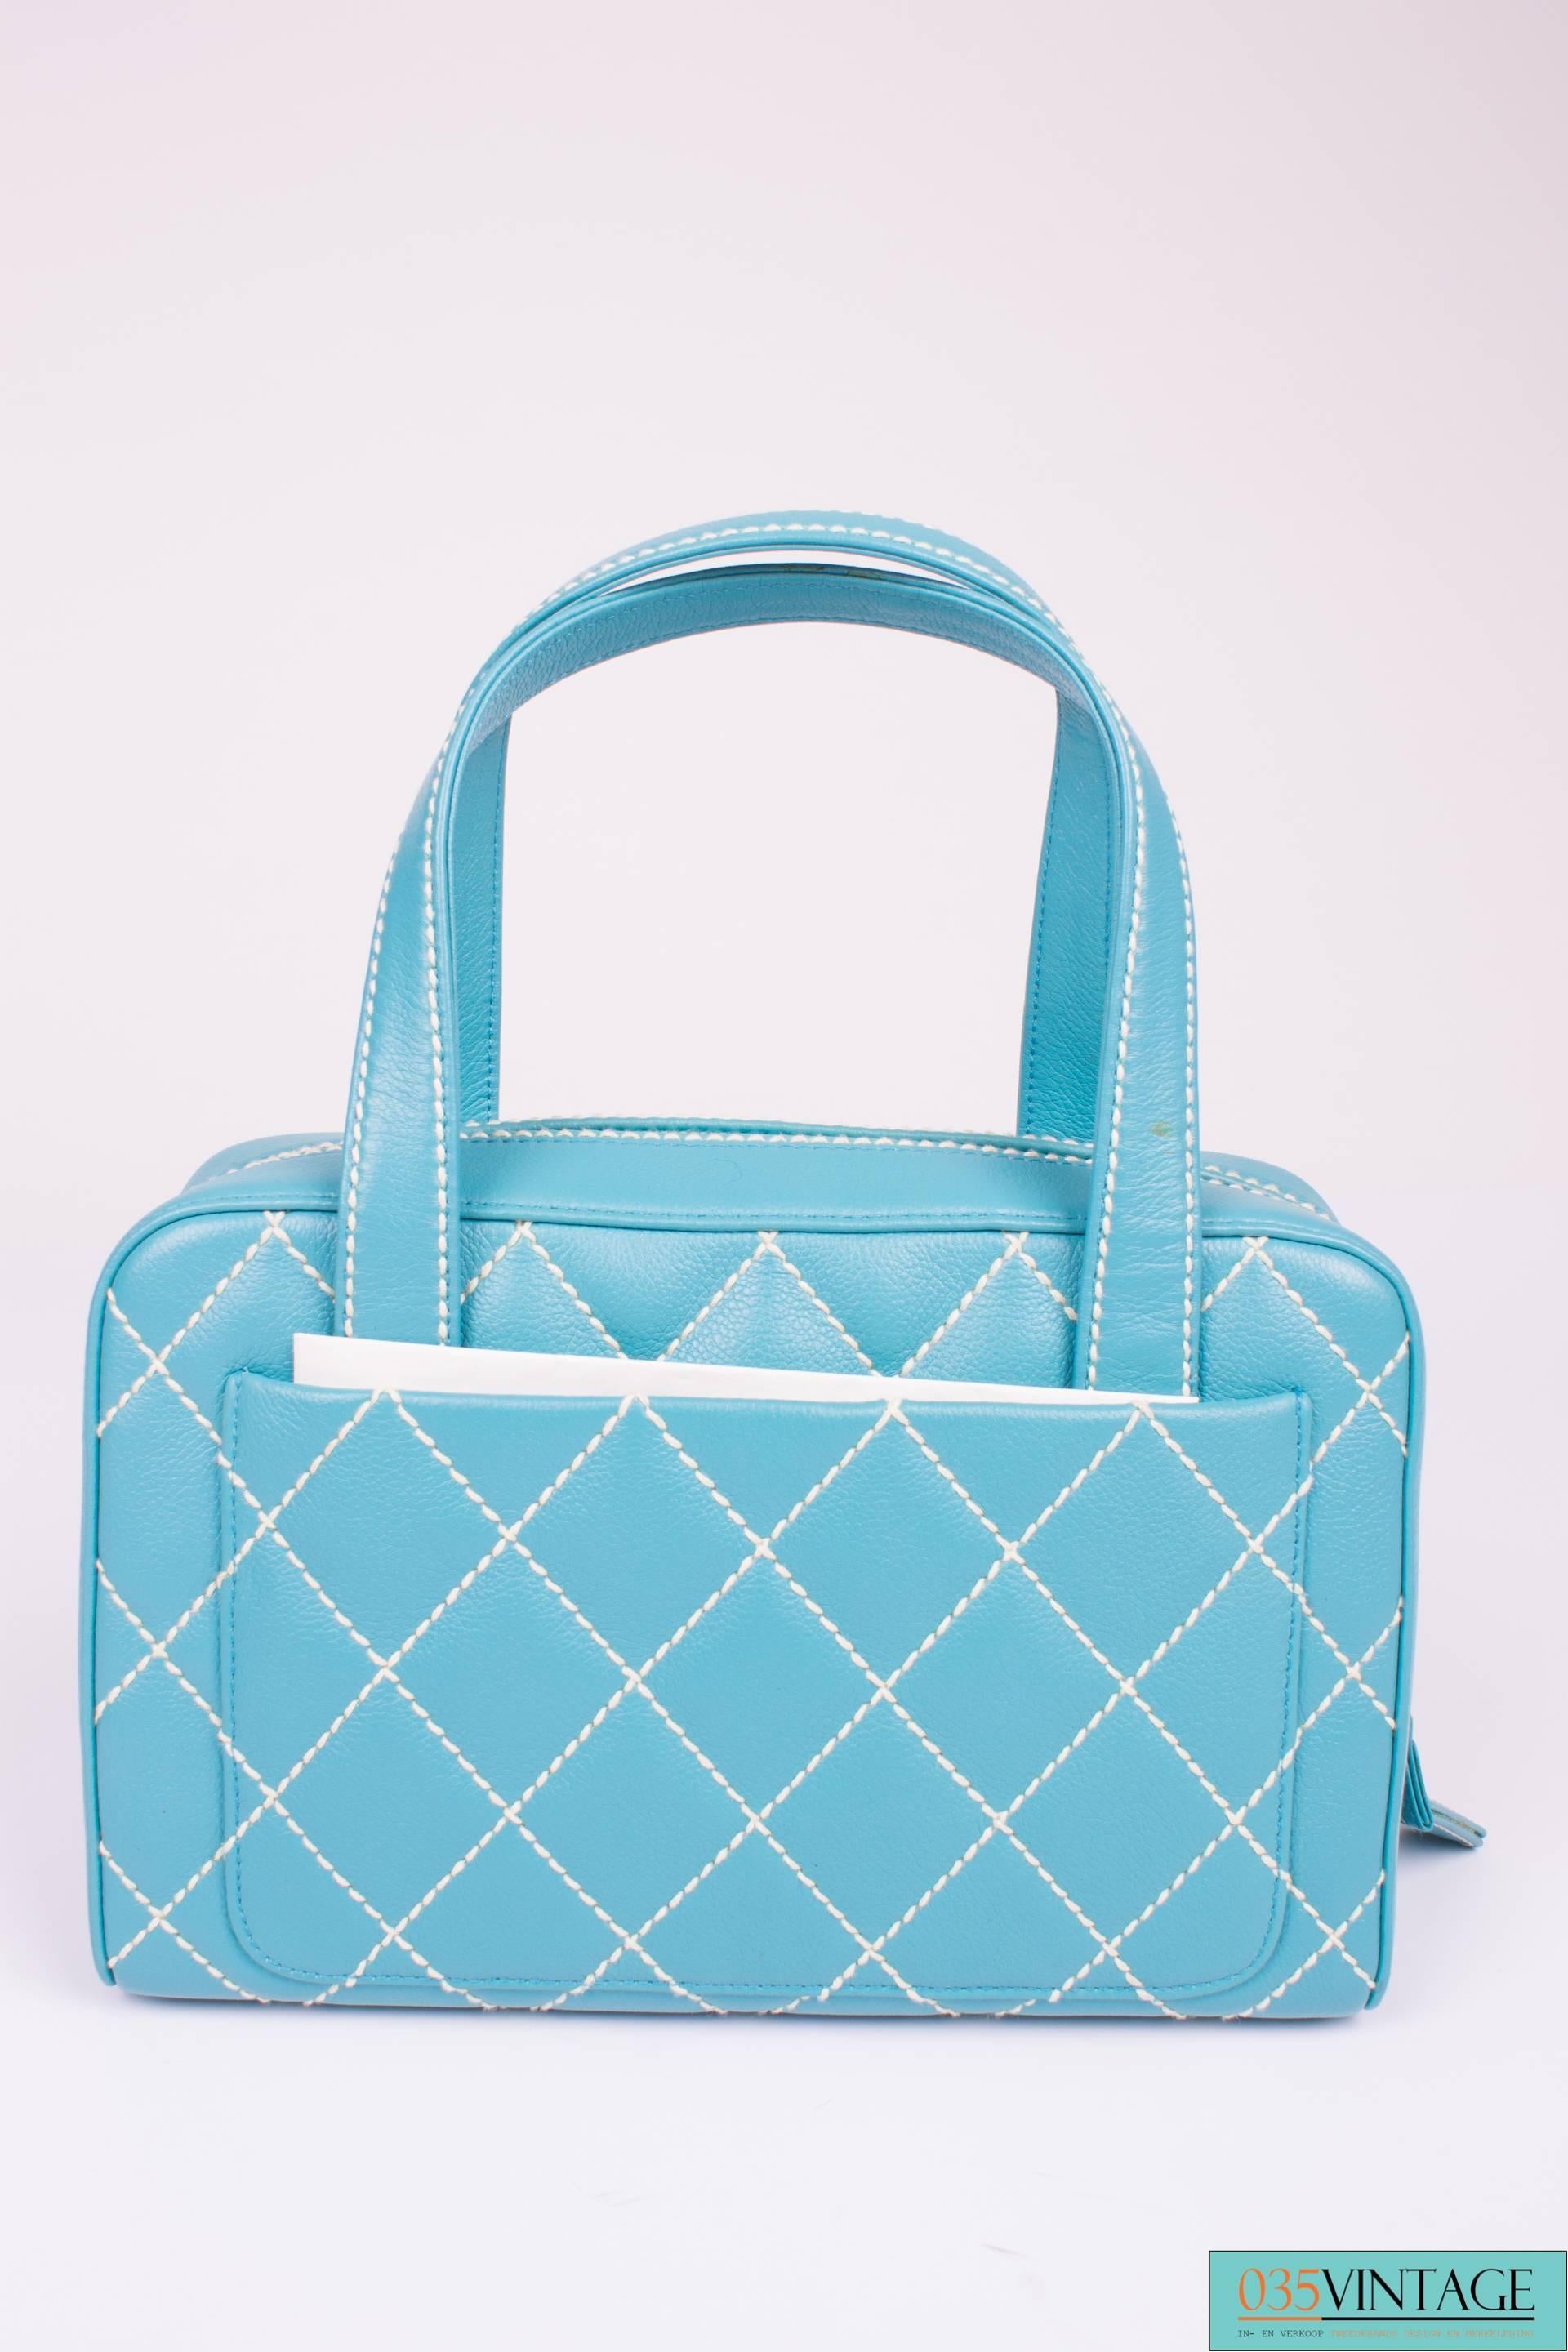 Blue Chanel Wild Stitch Quilted Zip Tote Bag - blue leather